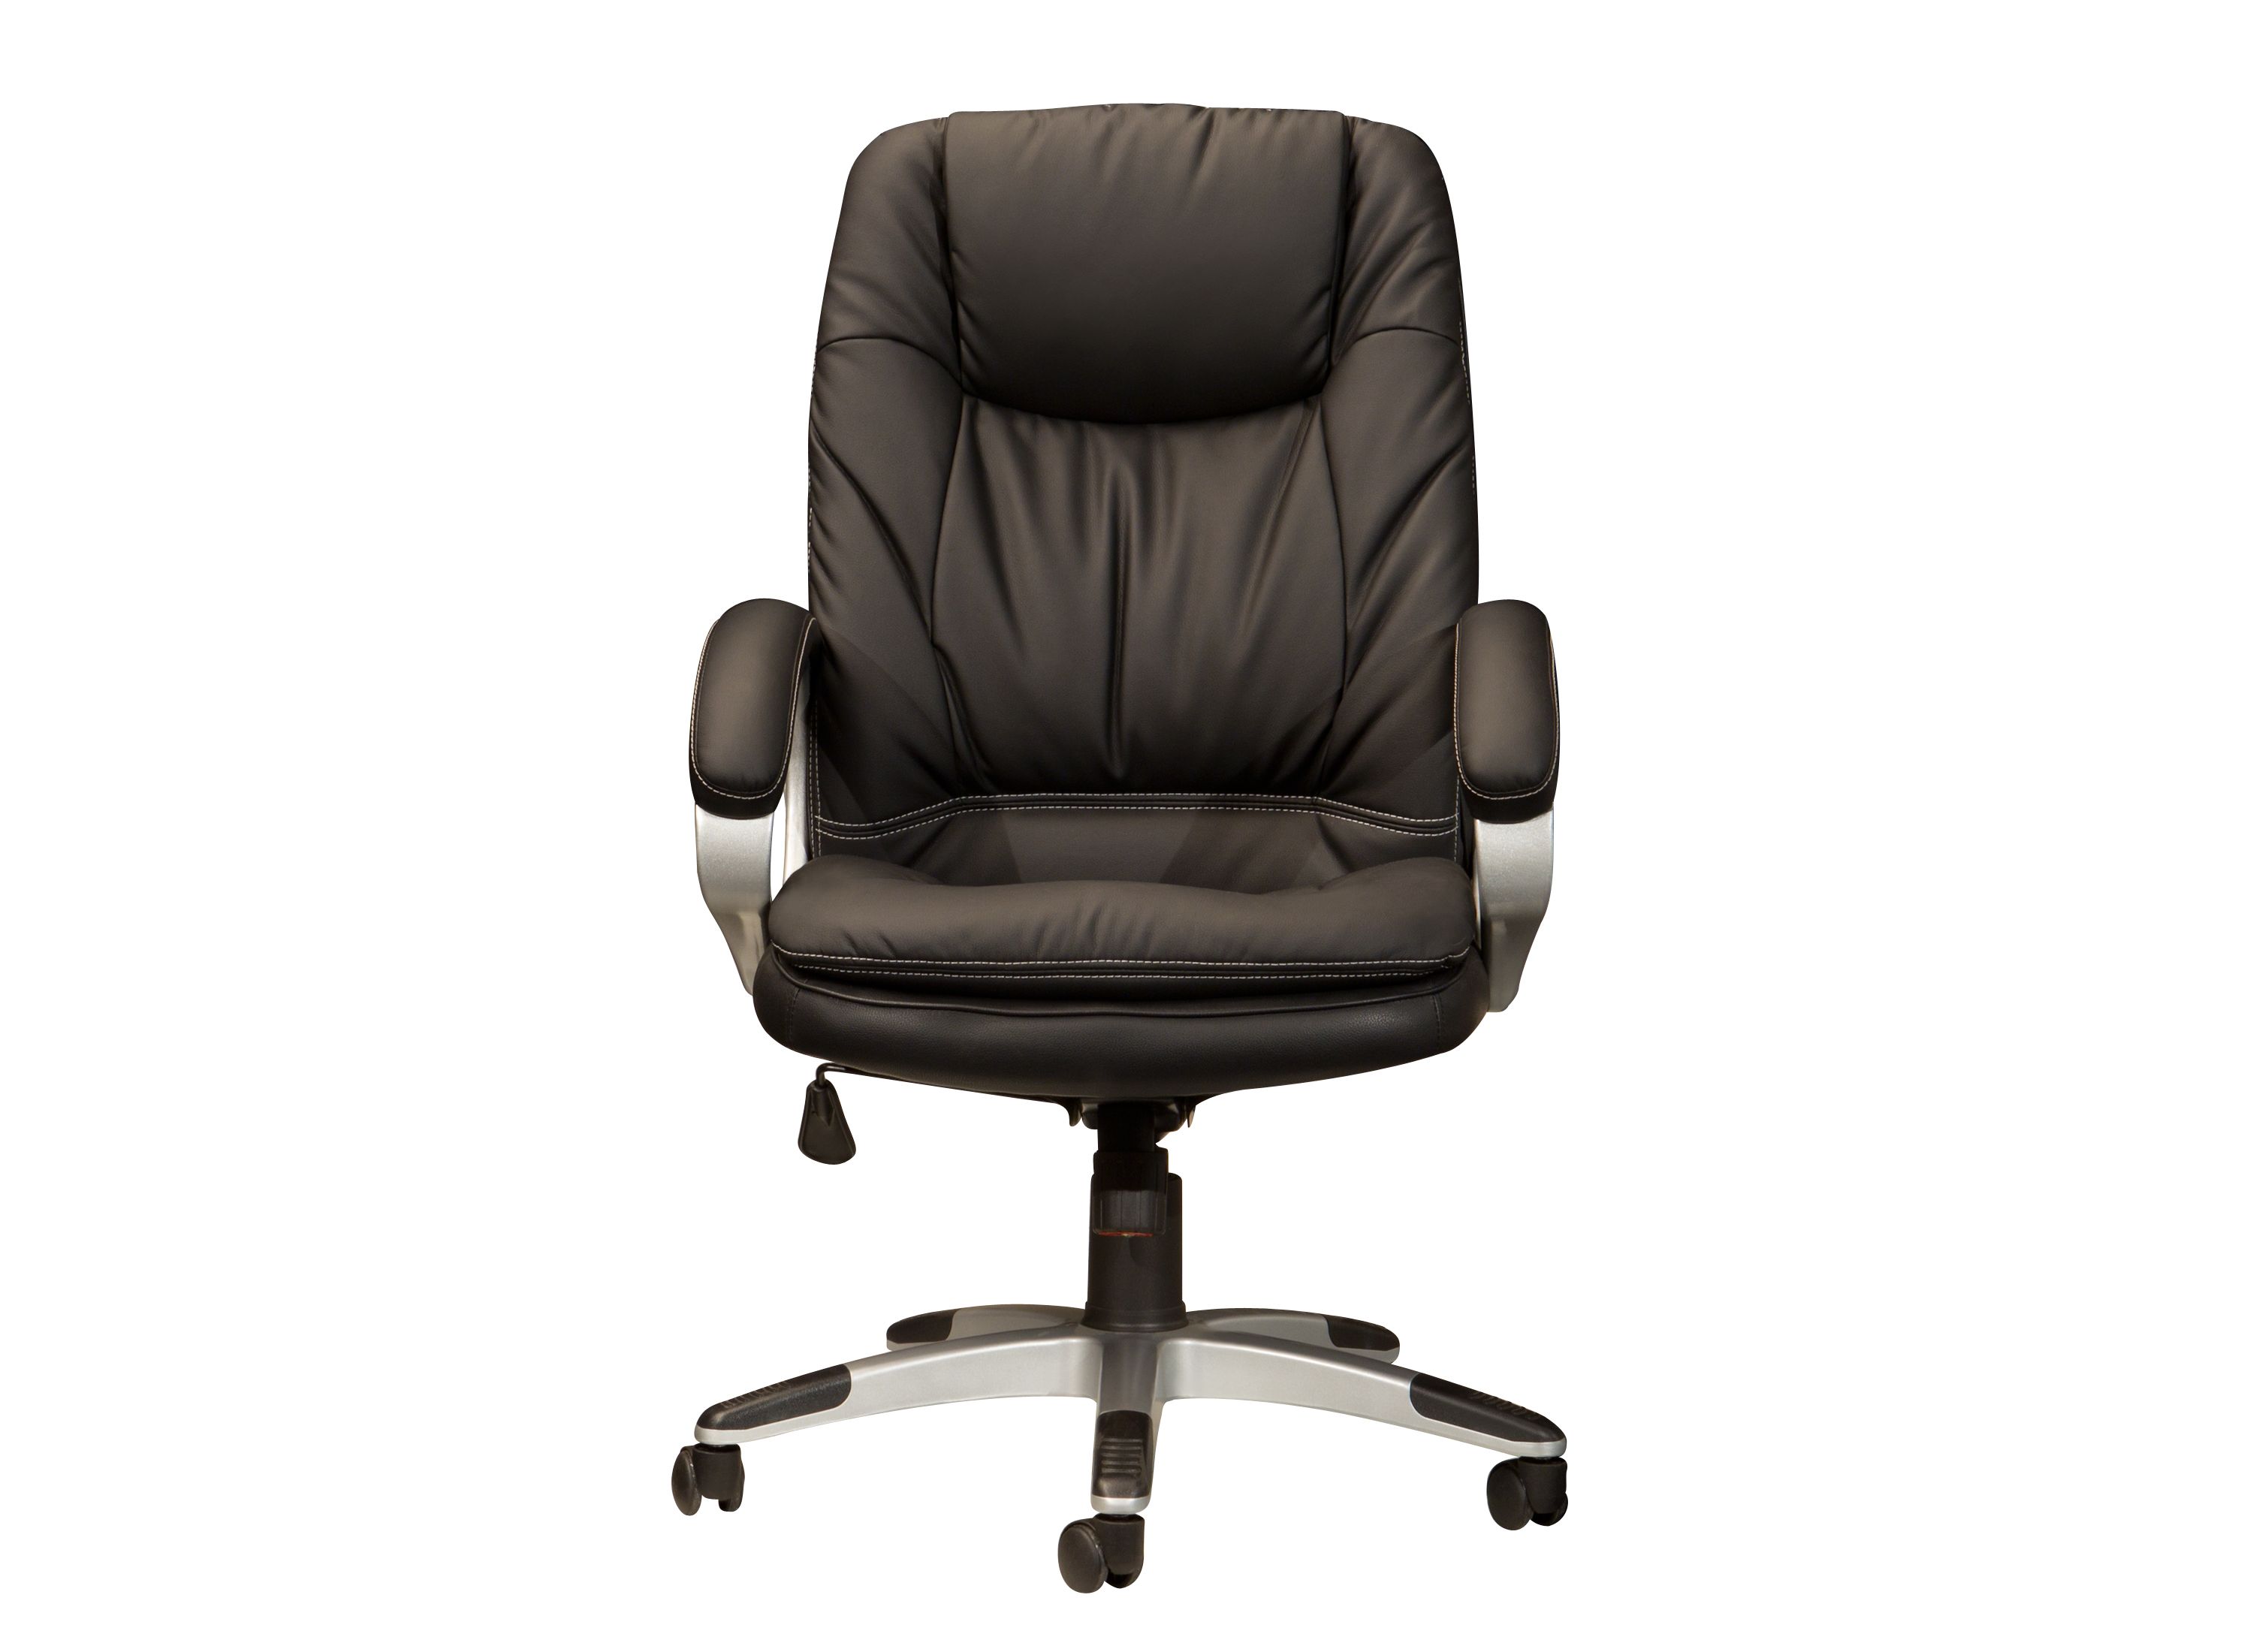 Home Office Chair on Lexicon Home Office Chair   Office Chairs   Raymour And Flanigan